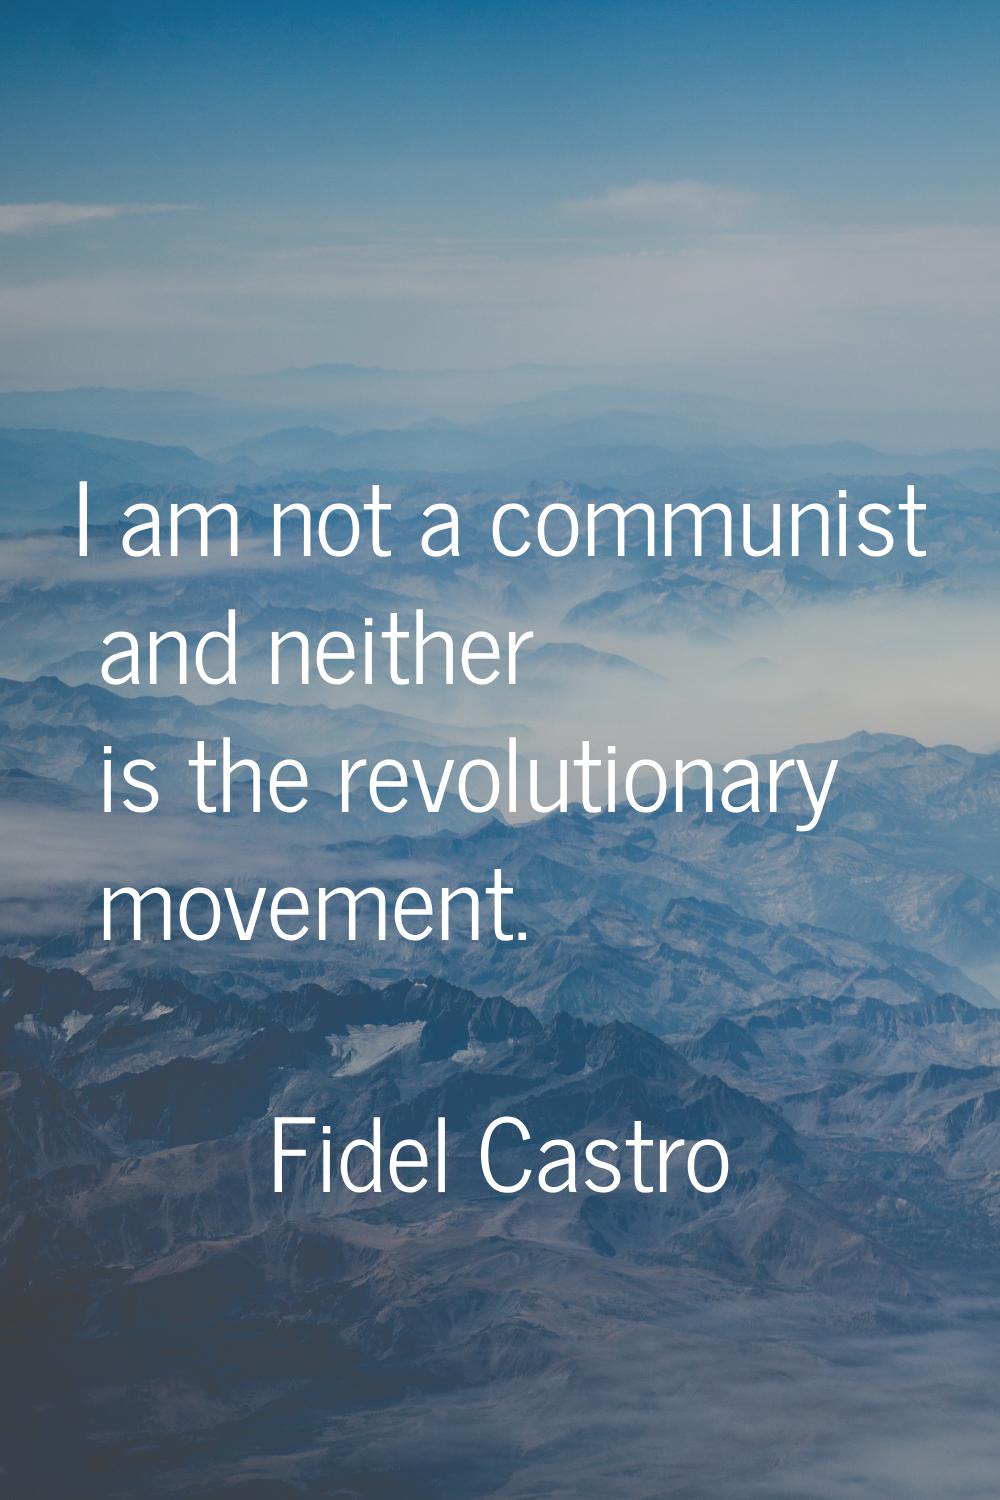 I am not a communist and neither is the revolutionary movement.